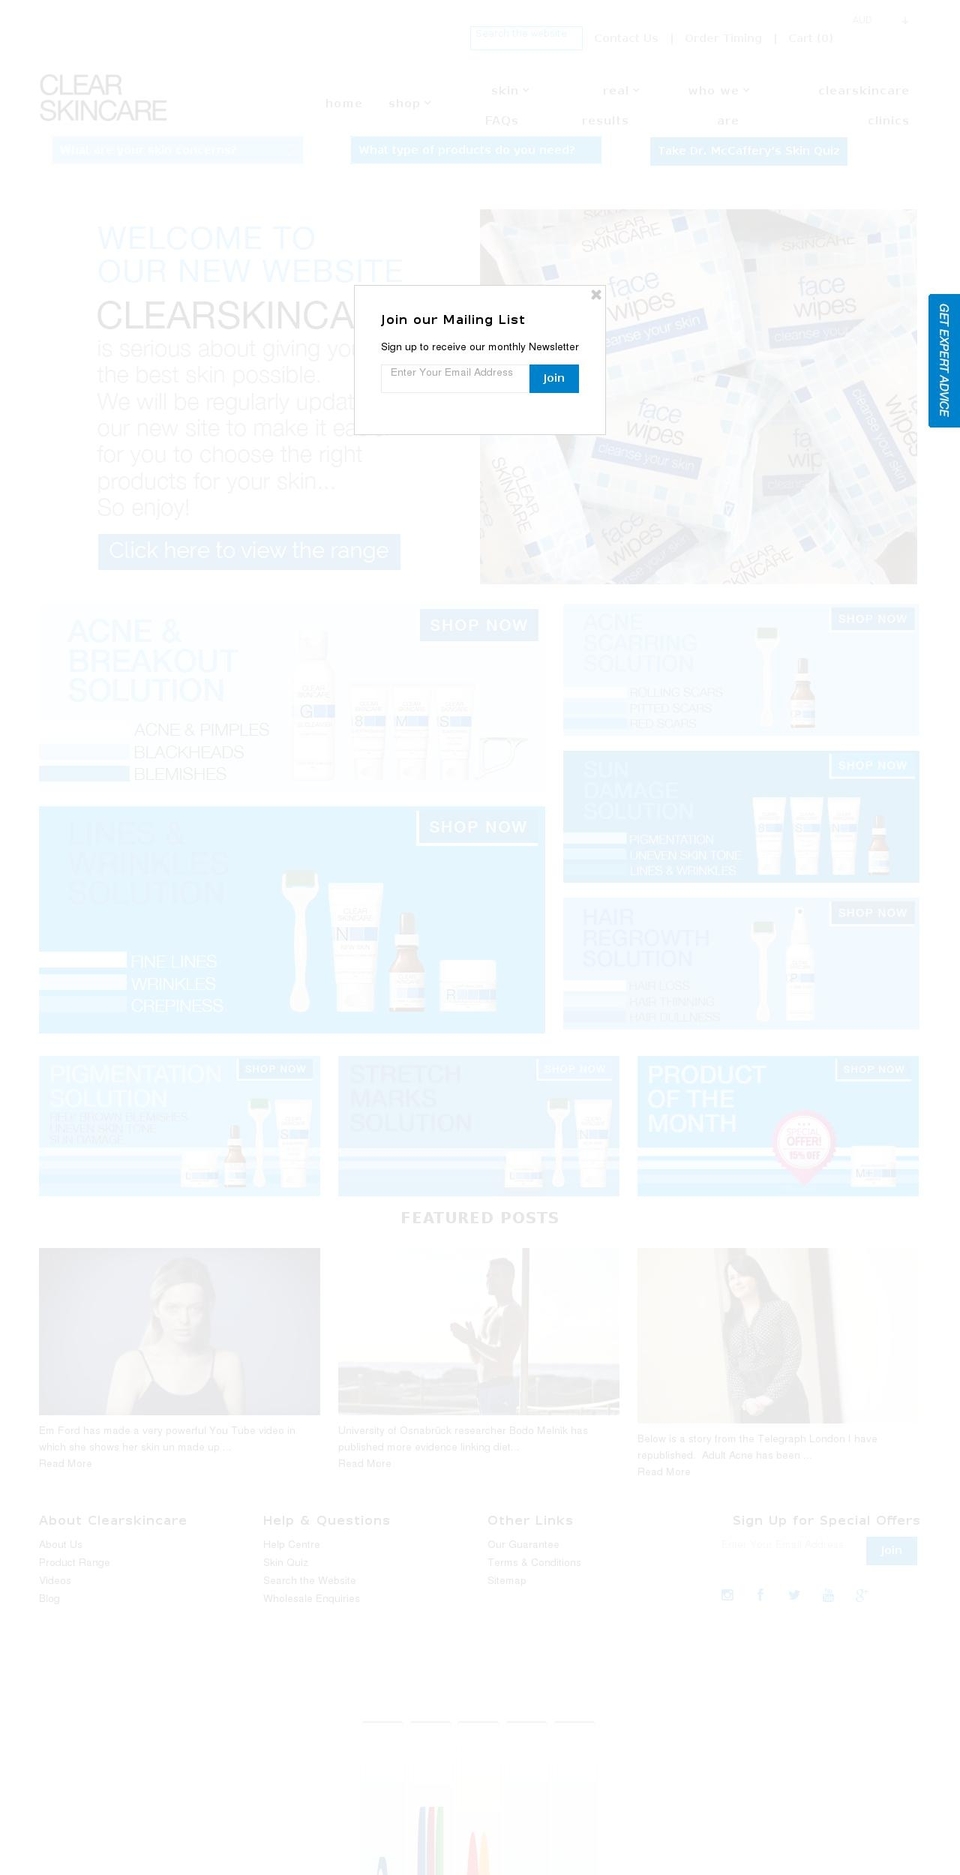 Theme Shopify theme site example clearskincare.com